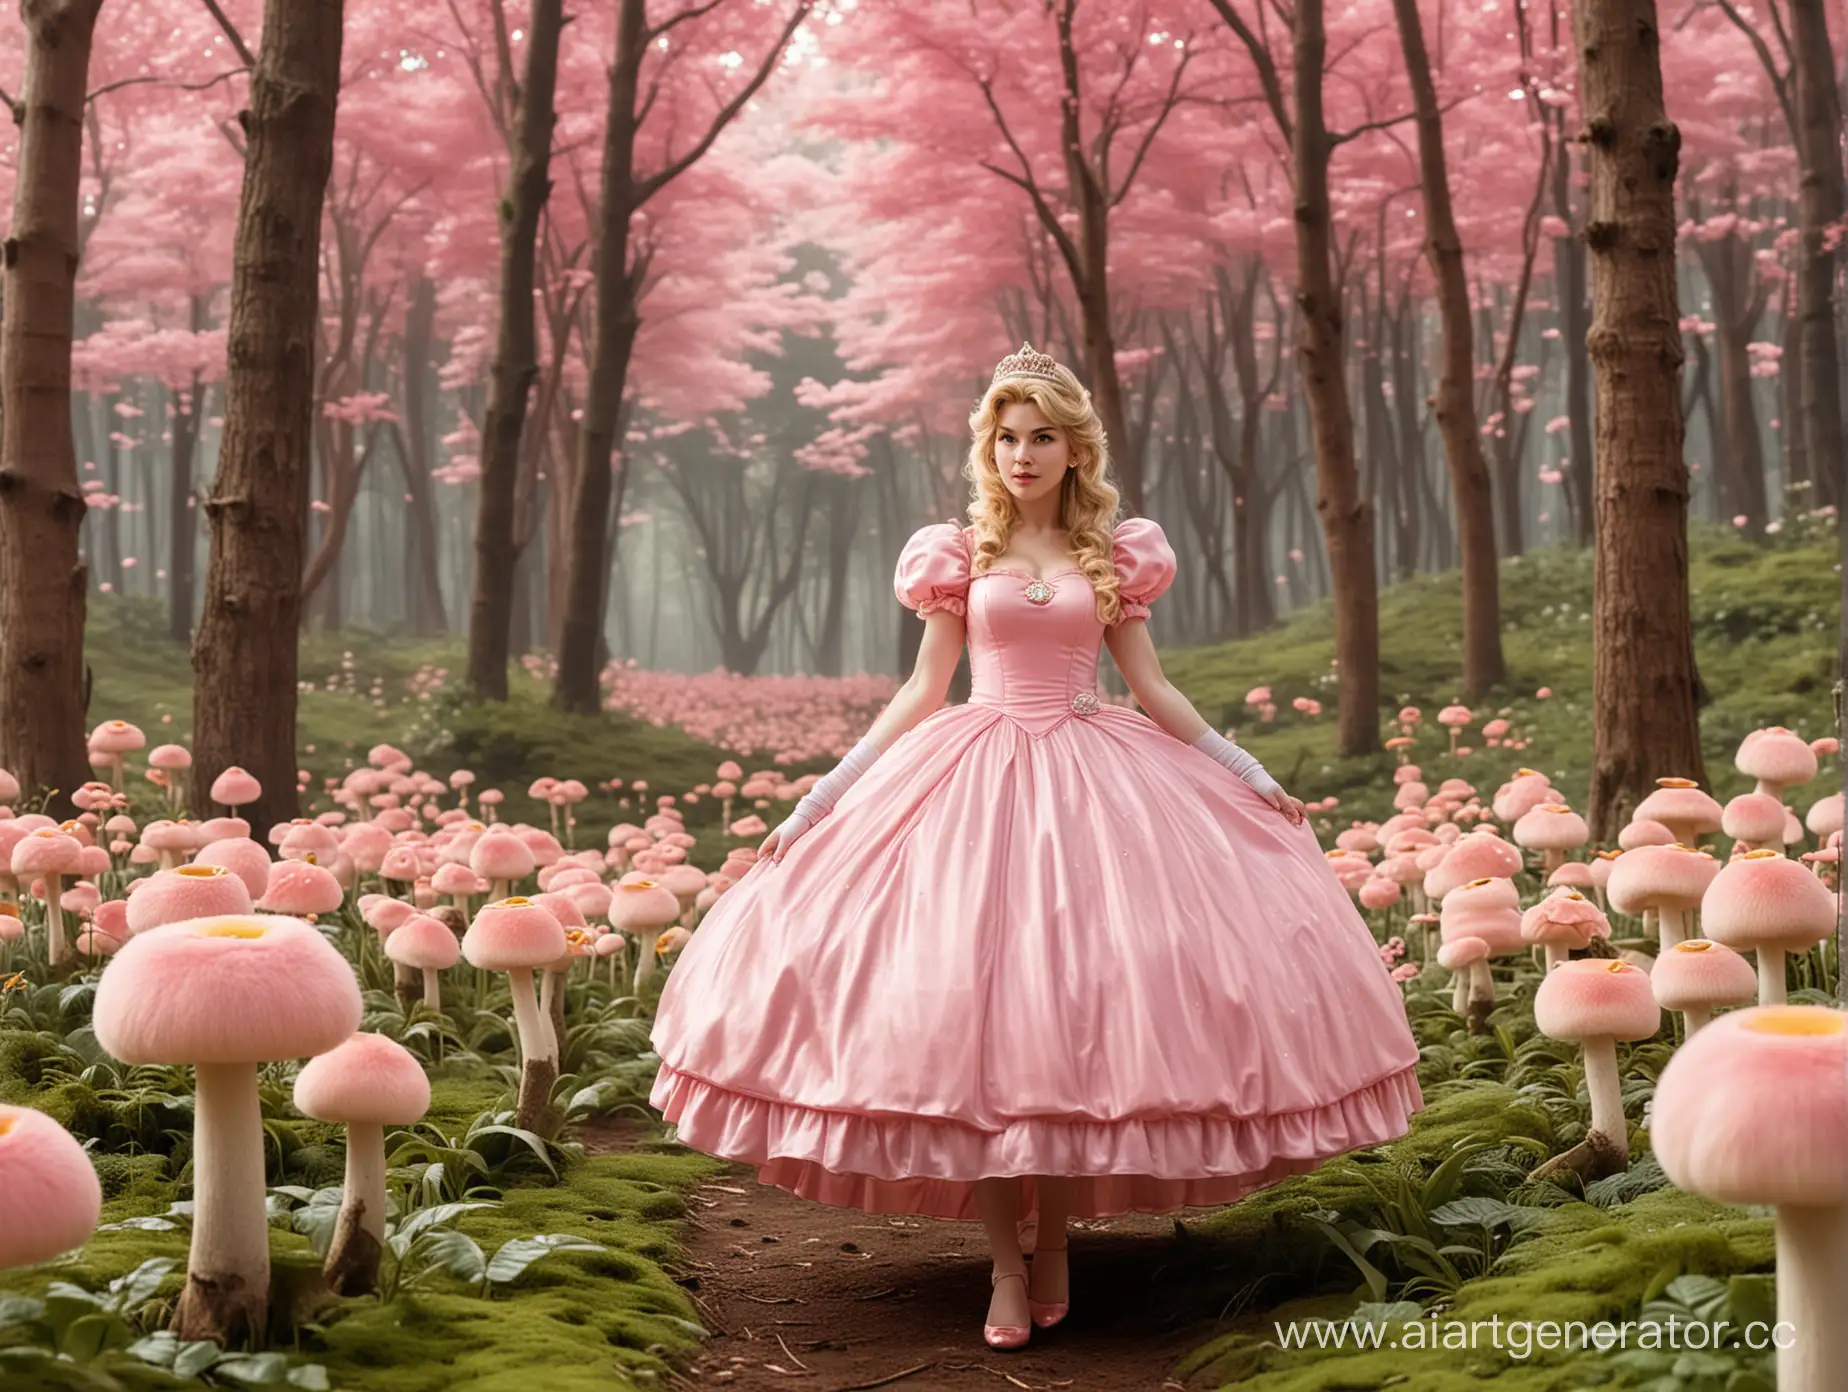 Princess Peach in a fluffy pink dress. art
standing in a mushroom forest